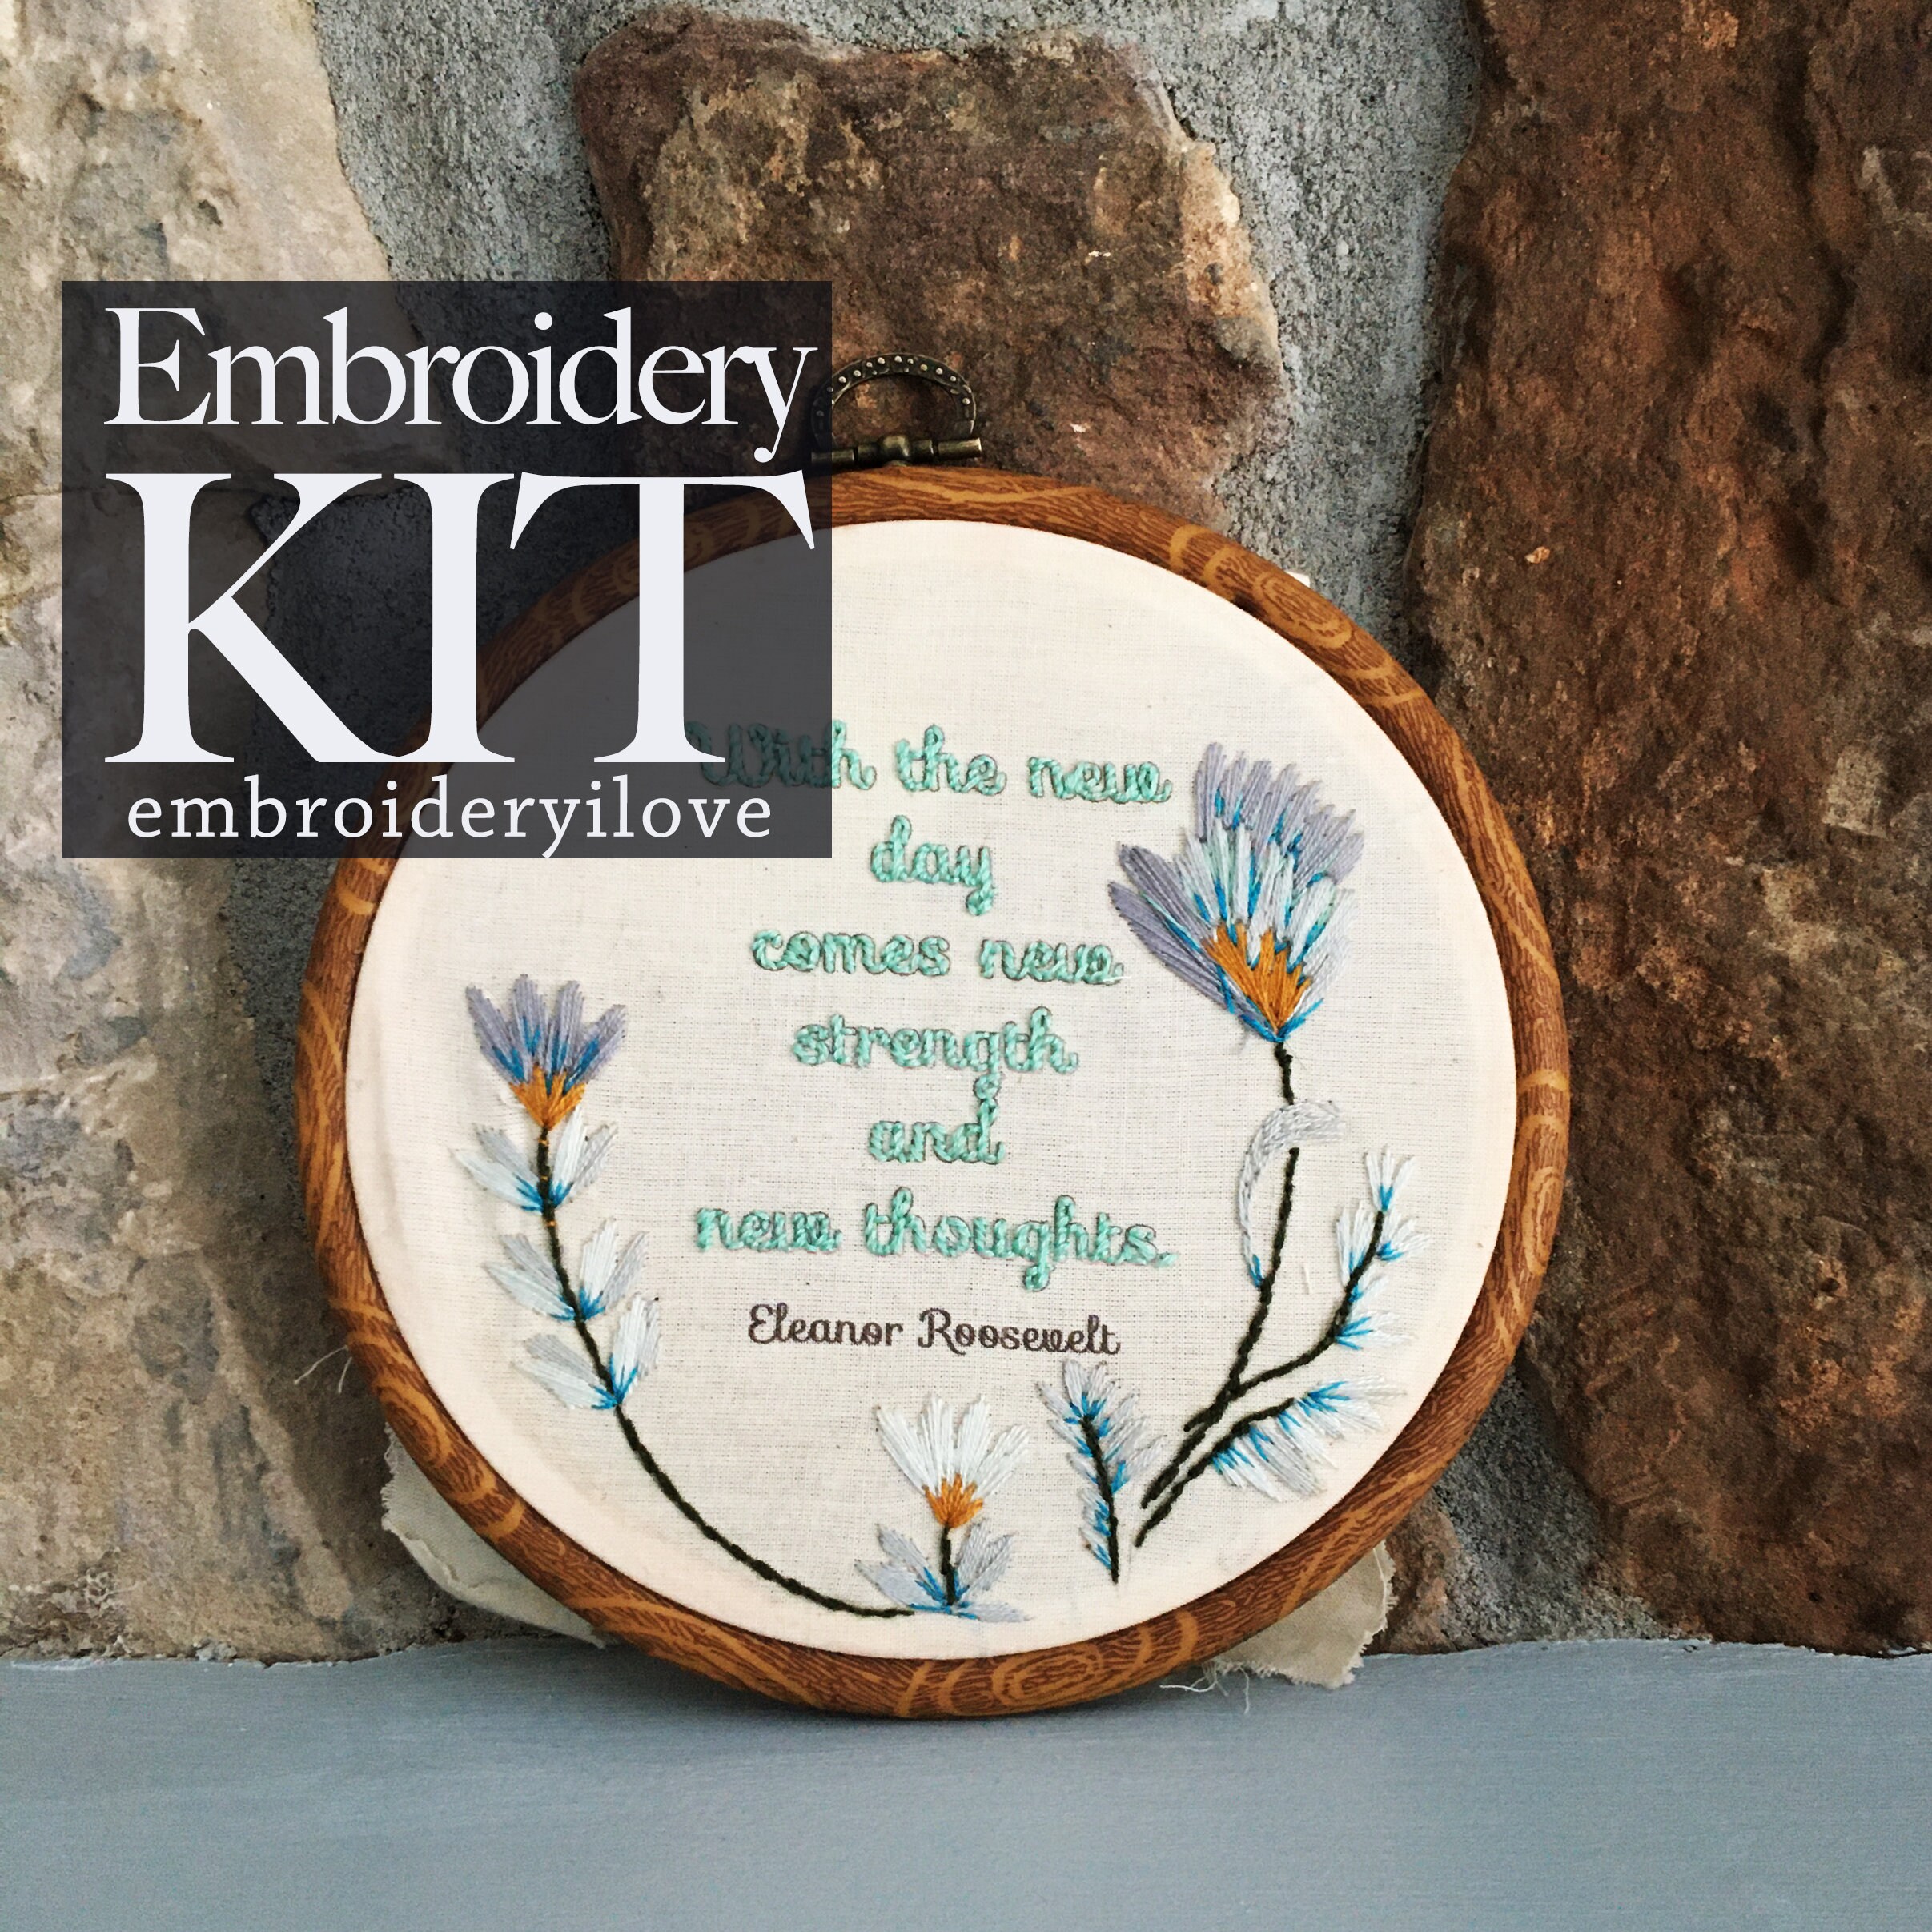 Hand Embroidery Kit perfect for beginners Full Embroidery Kit with Embroidery Hoop With The new day comes new thoughts